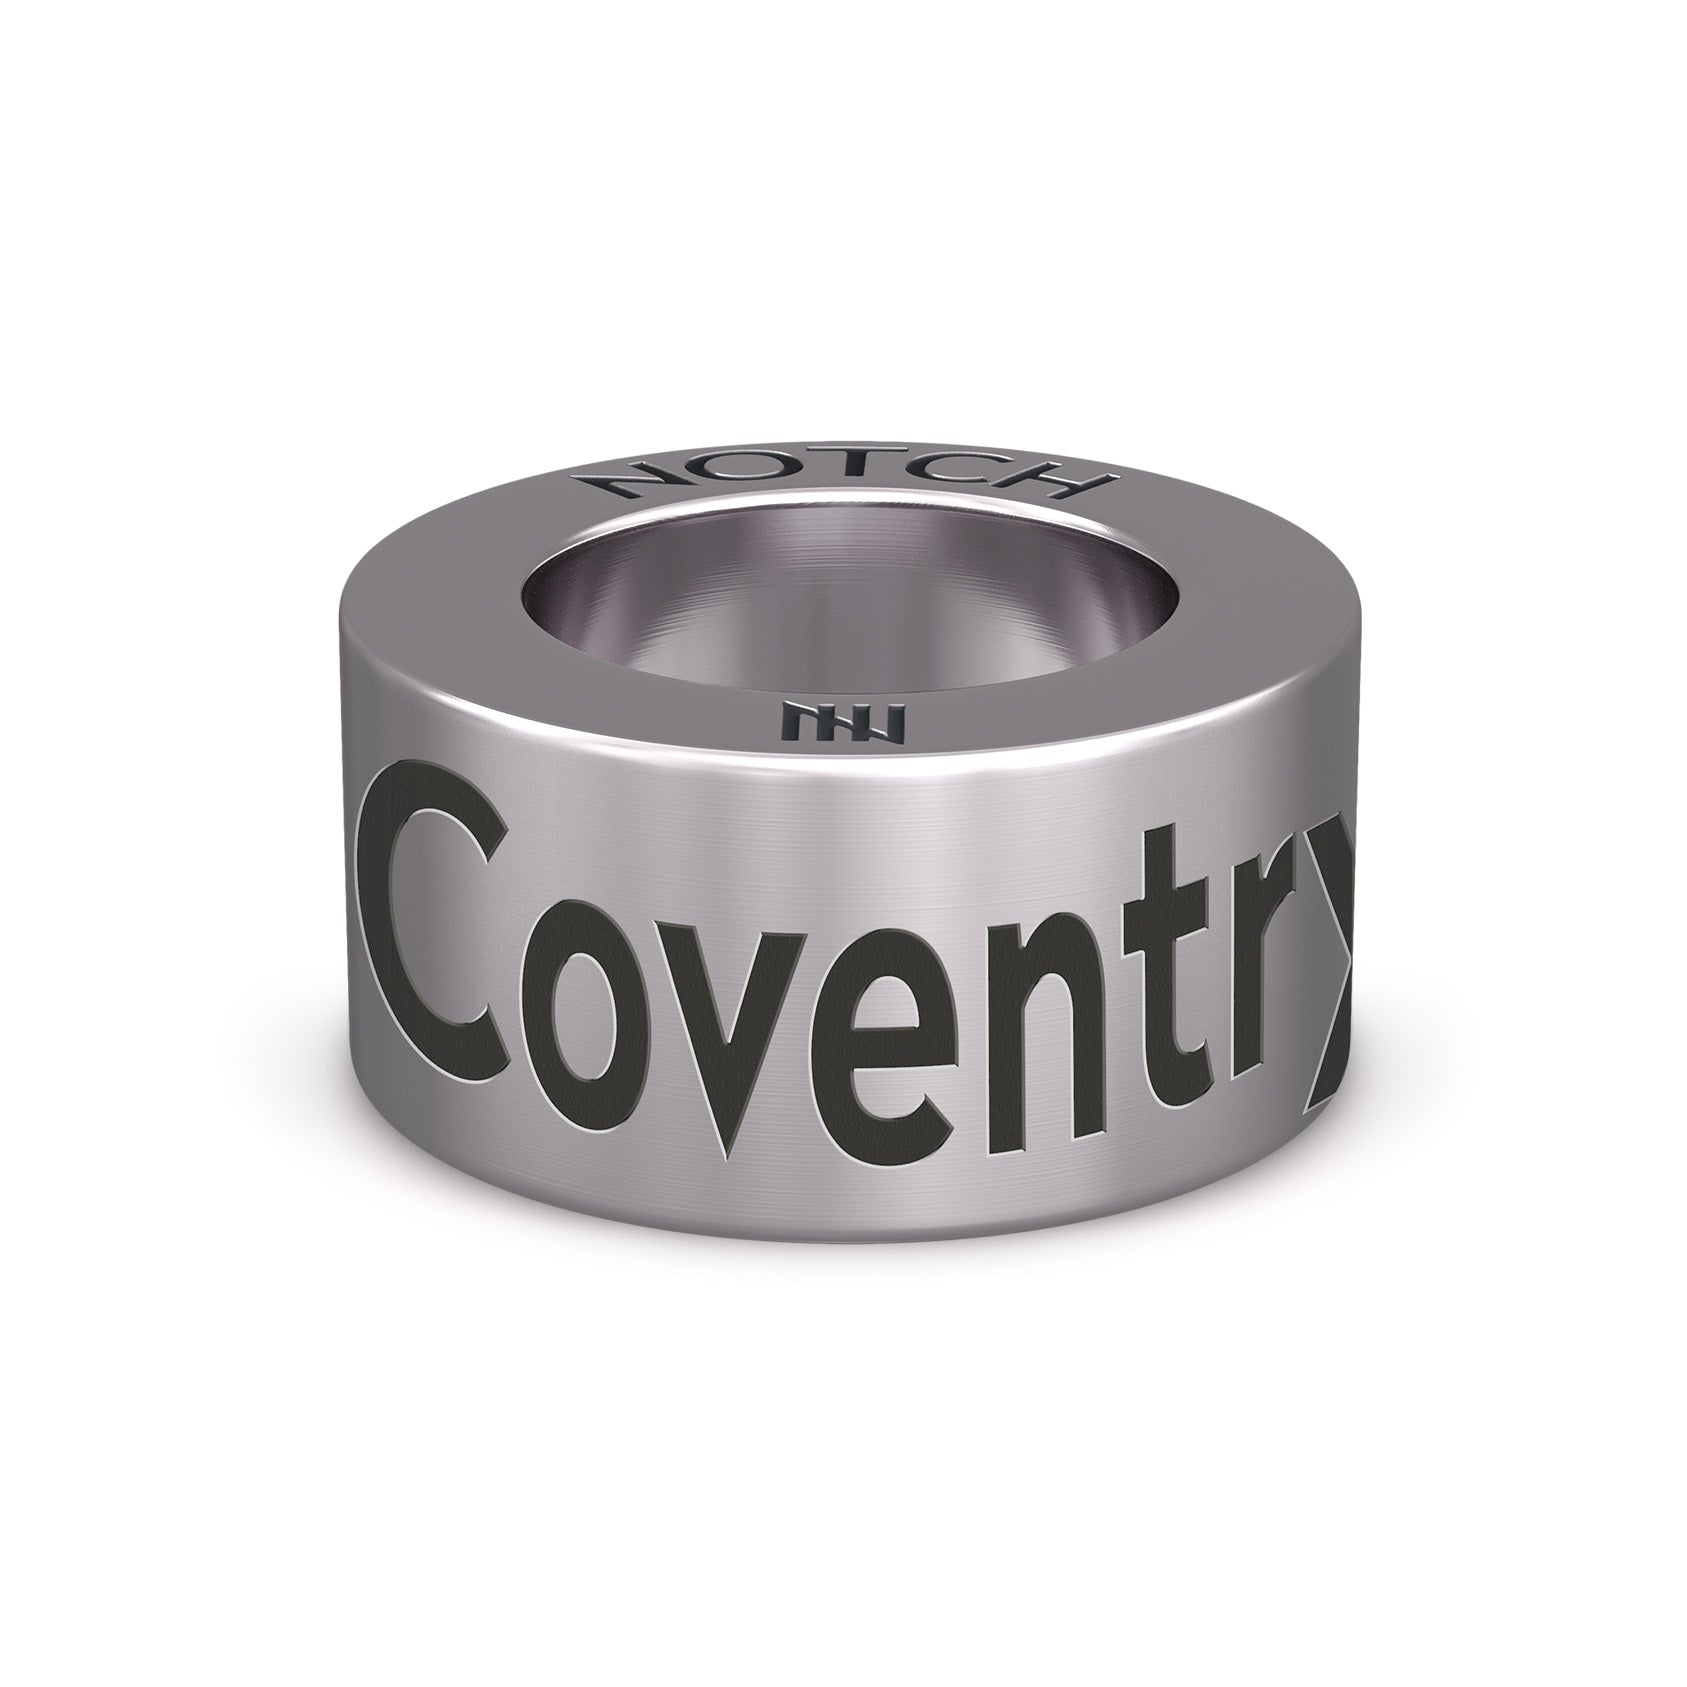 Coventry Way NOTCH Charm